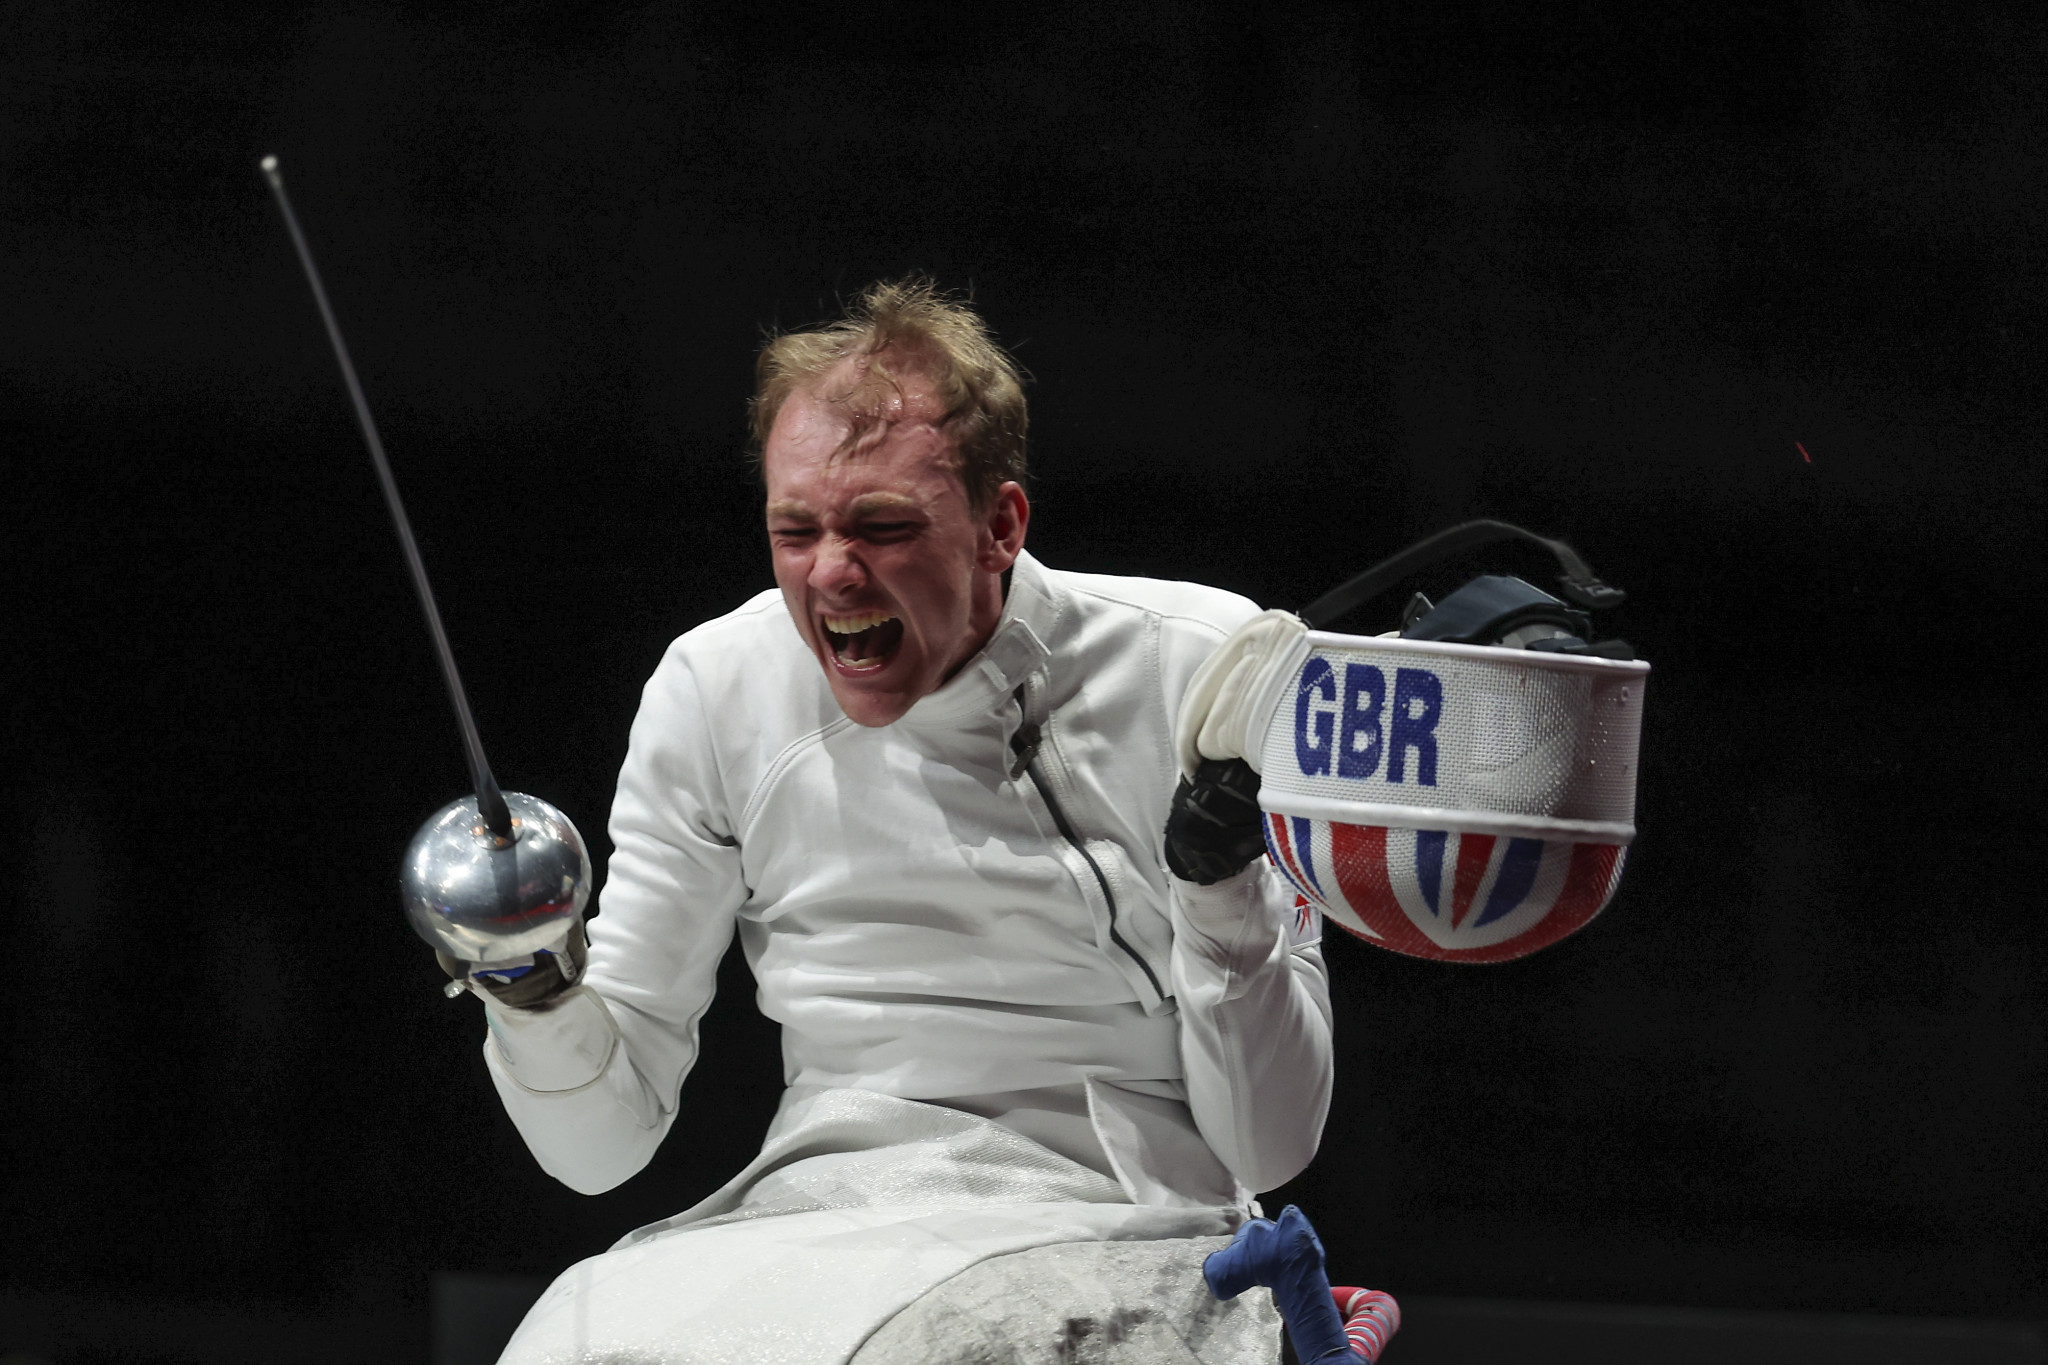 Gilliver completes medal haul to conclude IWAS Wheelchair Fencing World Cup